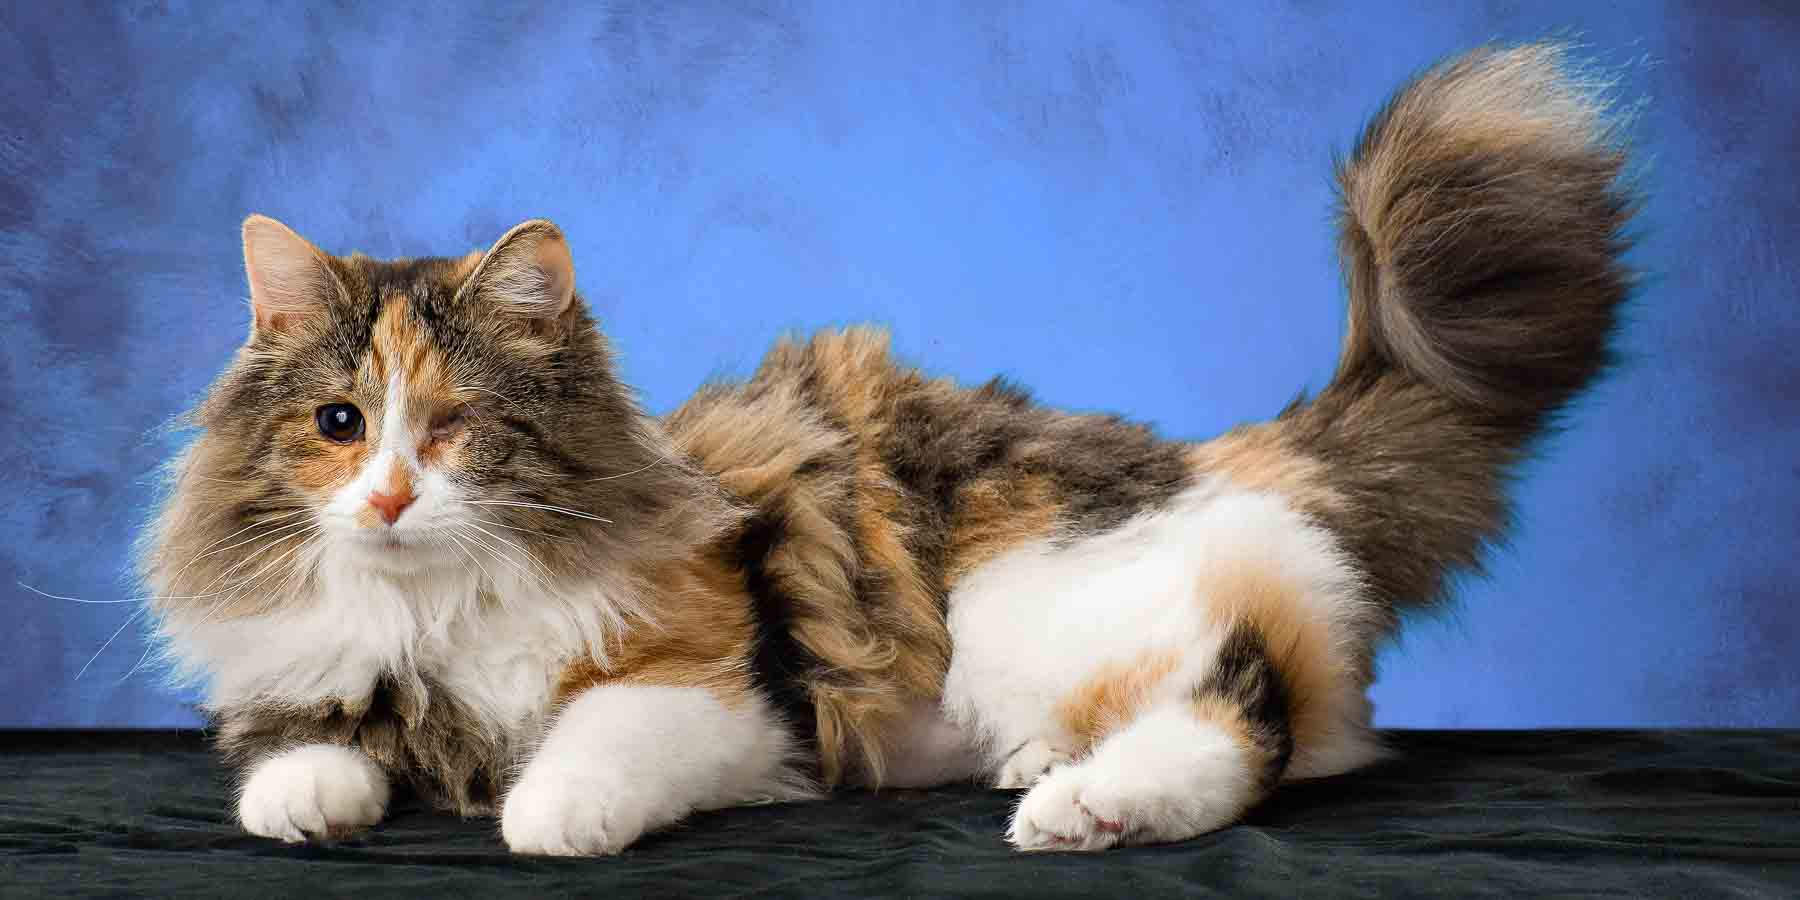 A cat laying on its back with it's tail curled up.